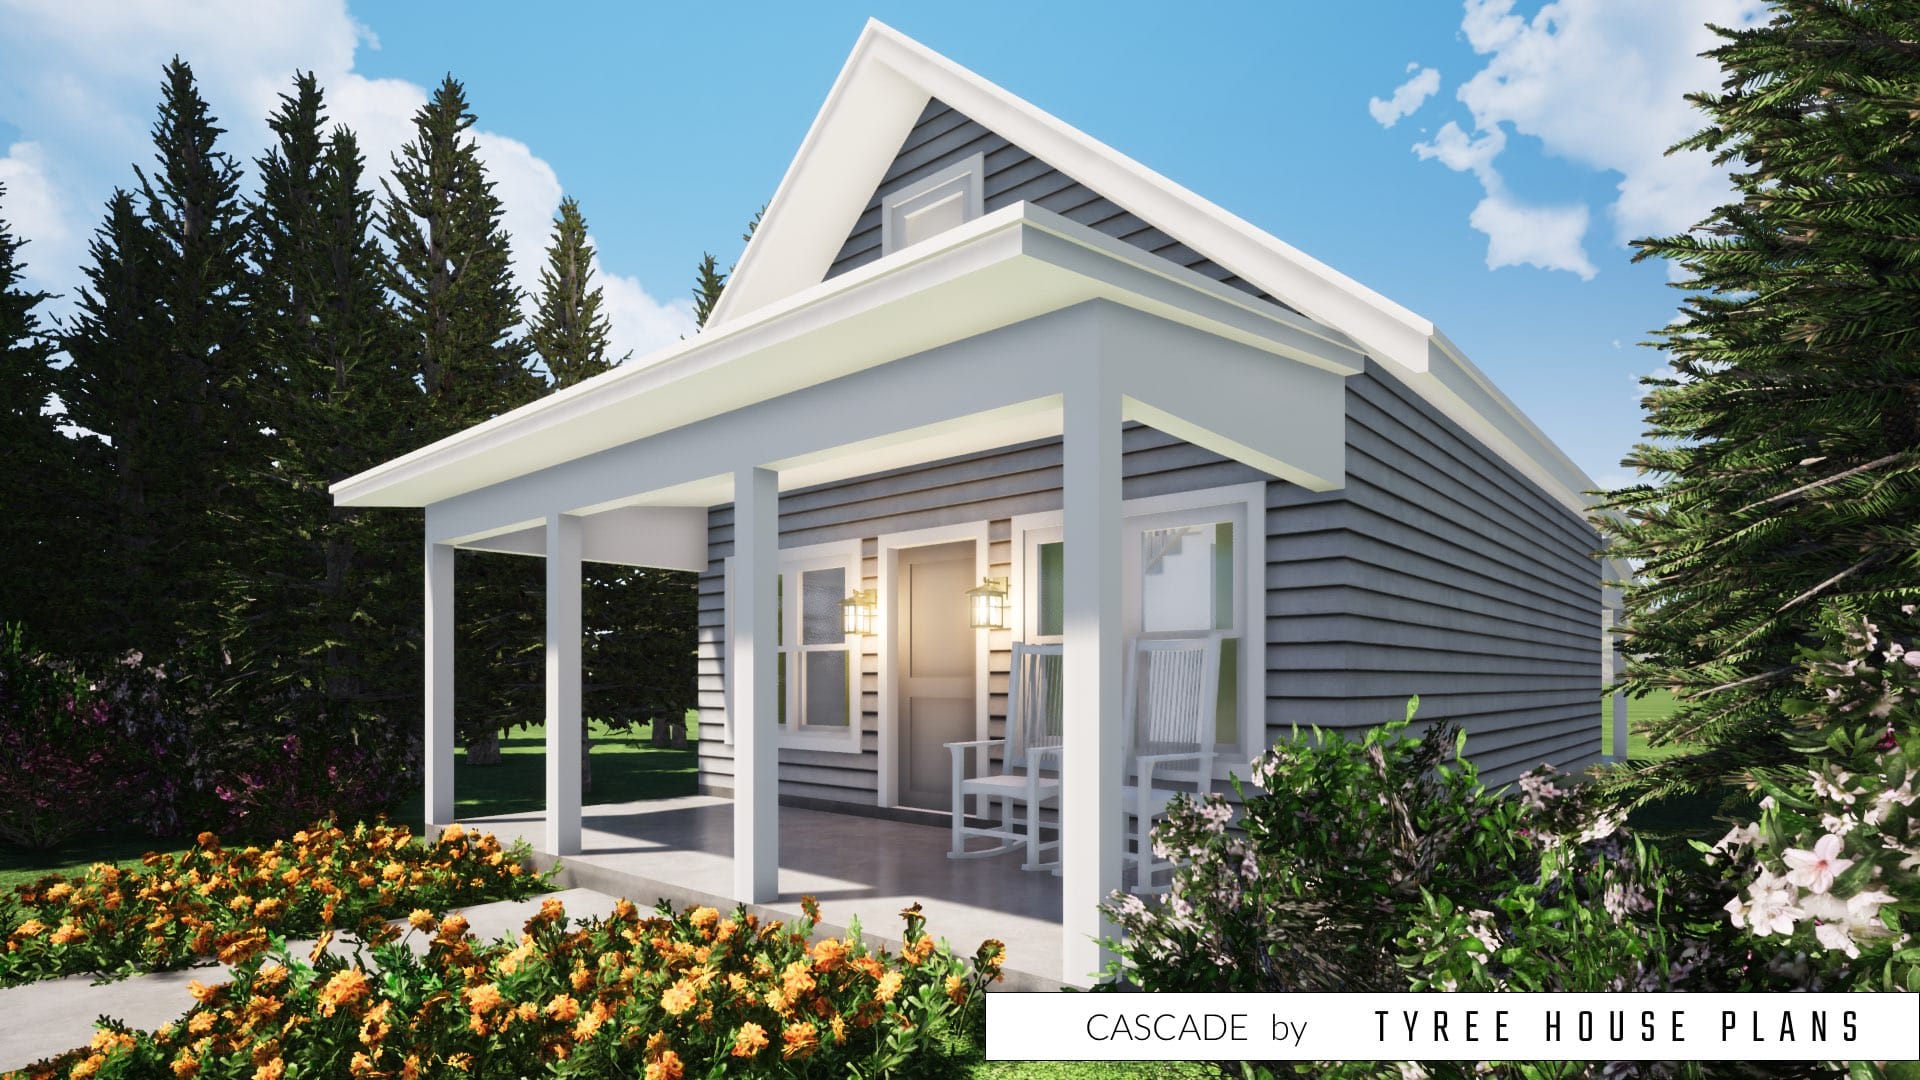 Cascade House Plan by Tyree House Plans